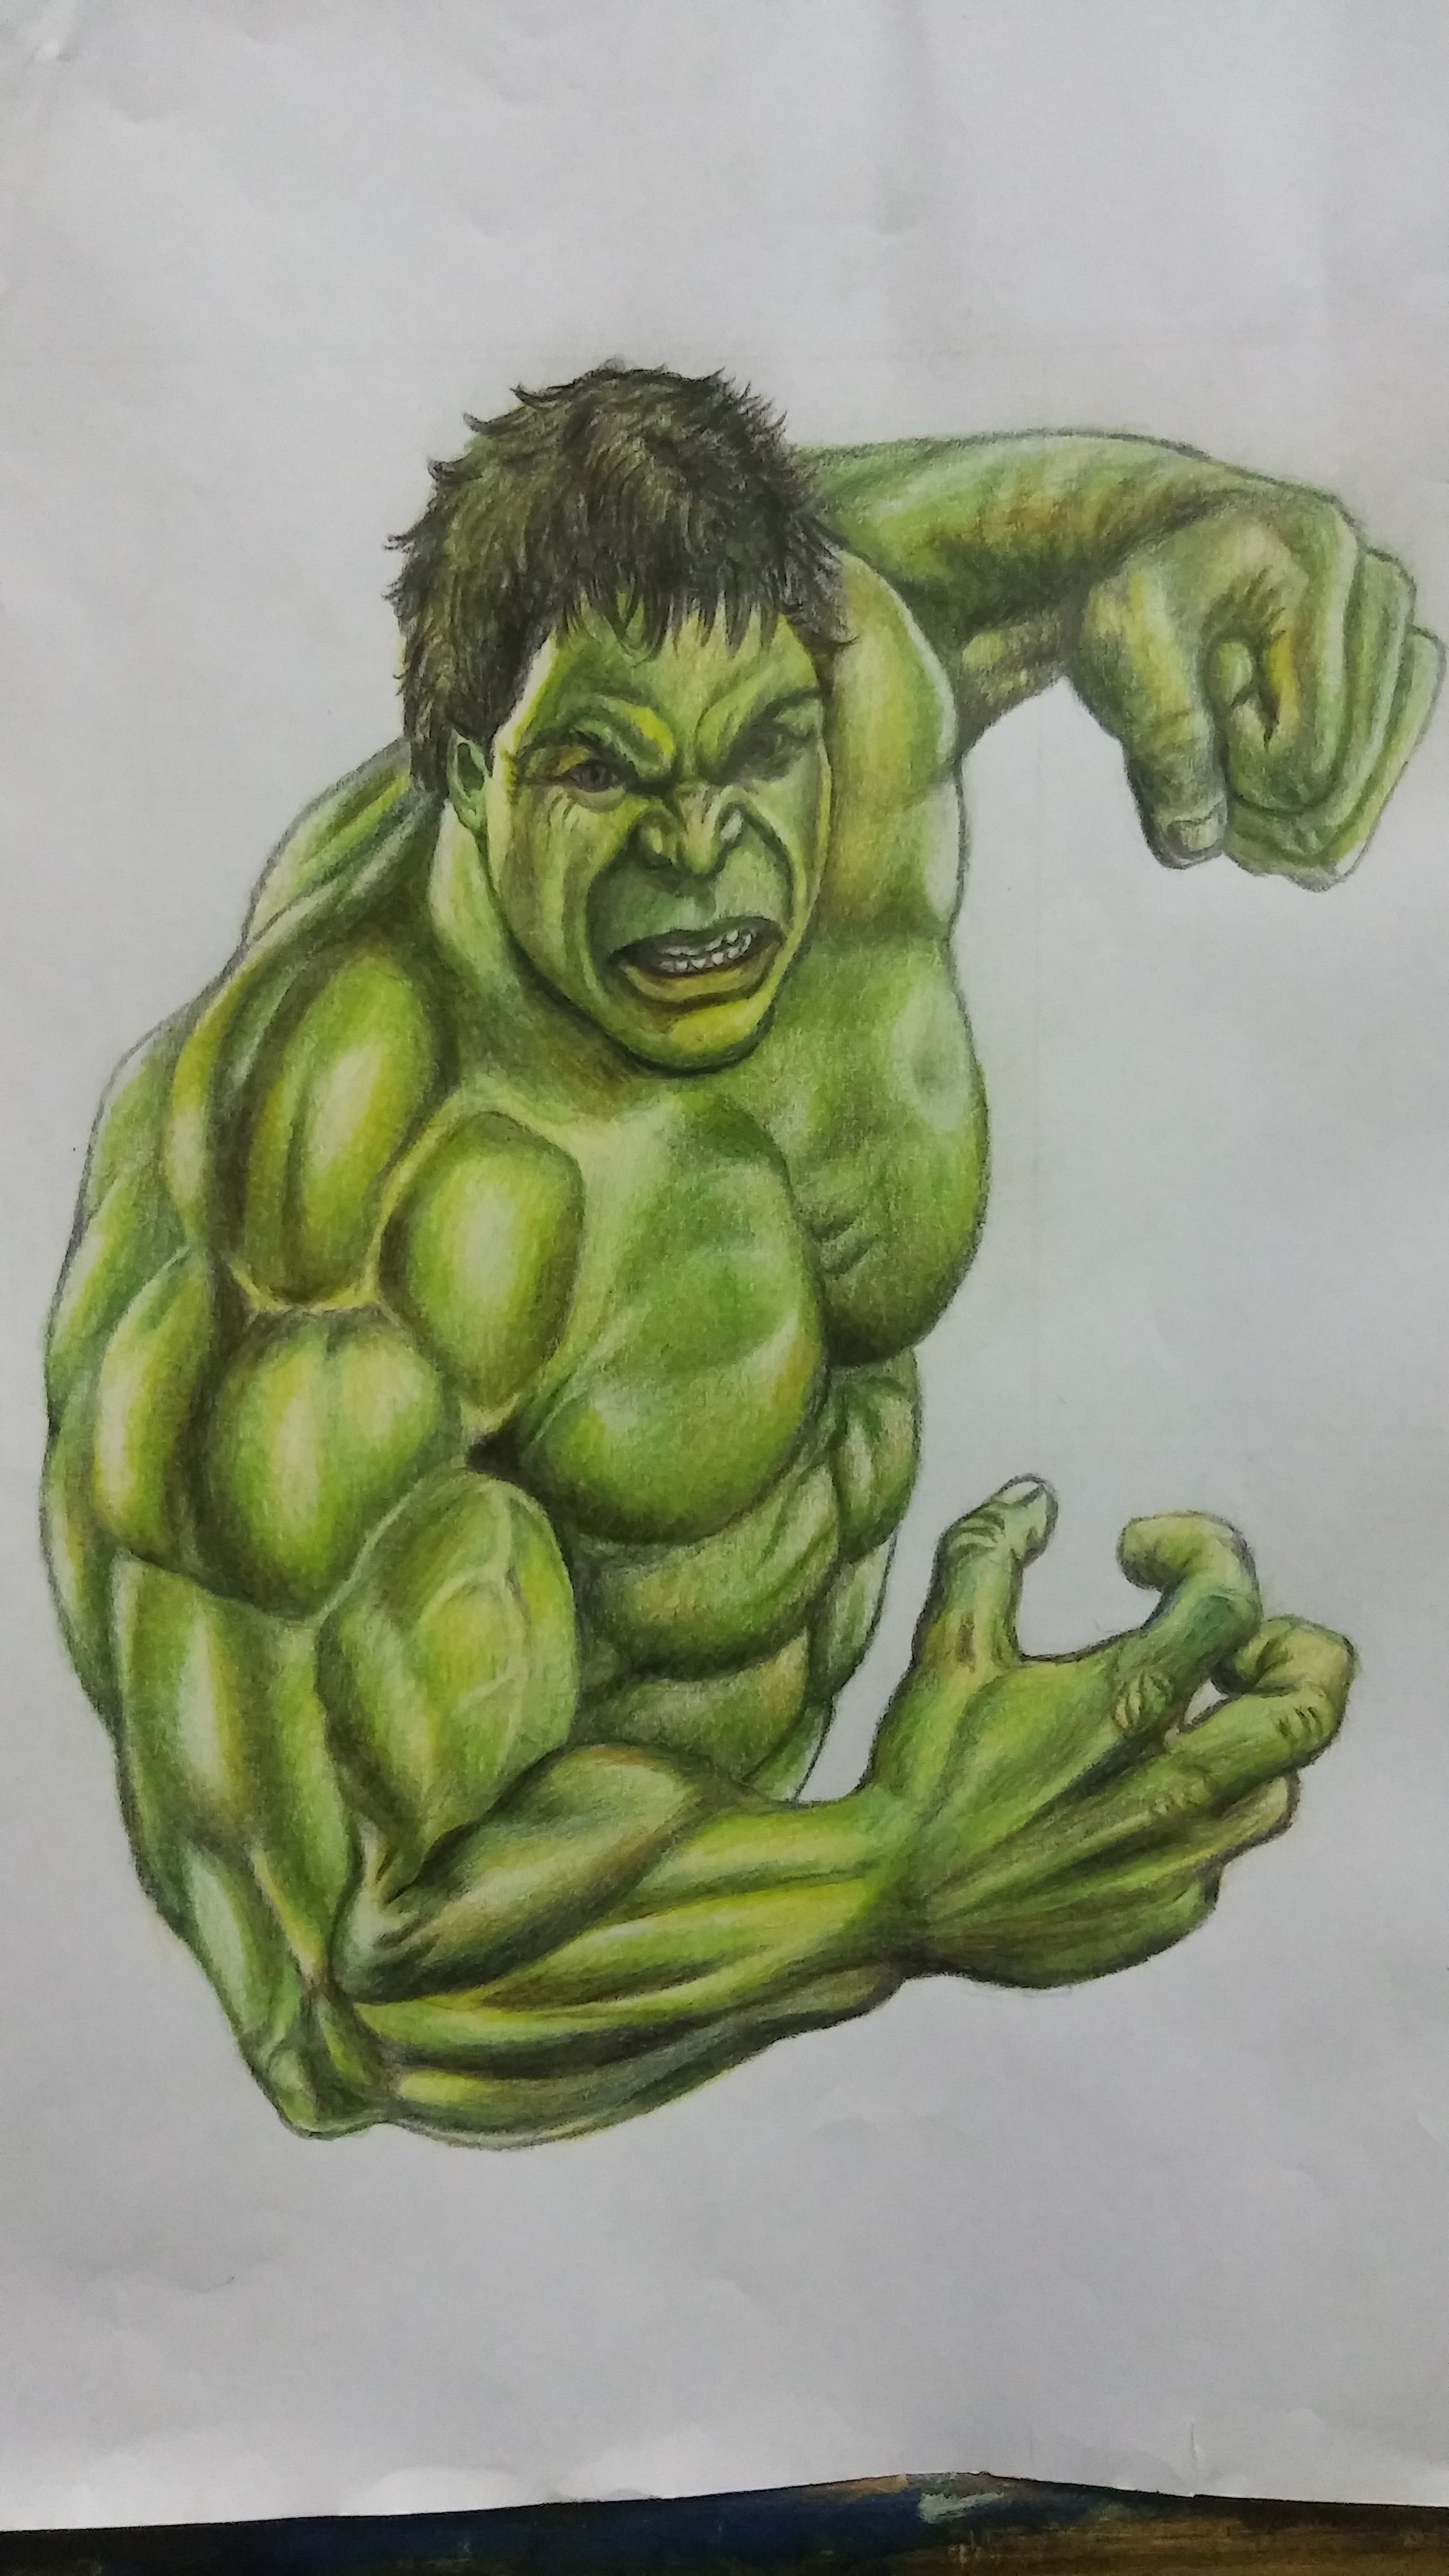 Incredible Hulk Coloring Pages  Get Coloring Pages